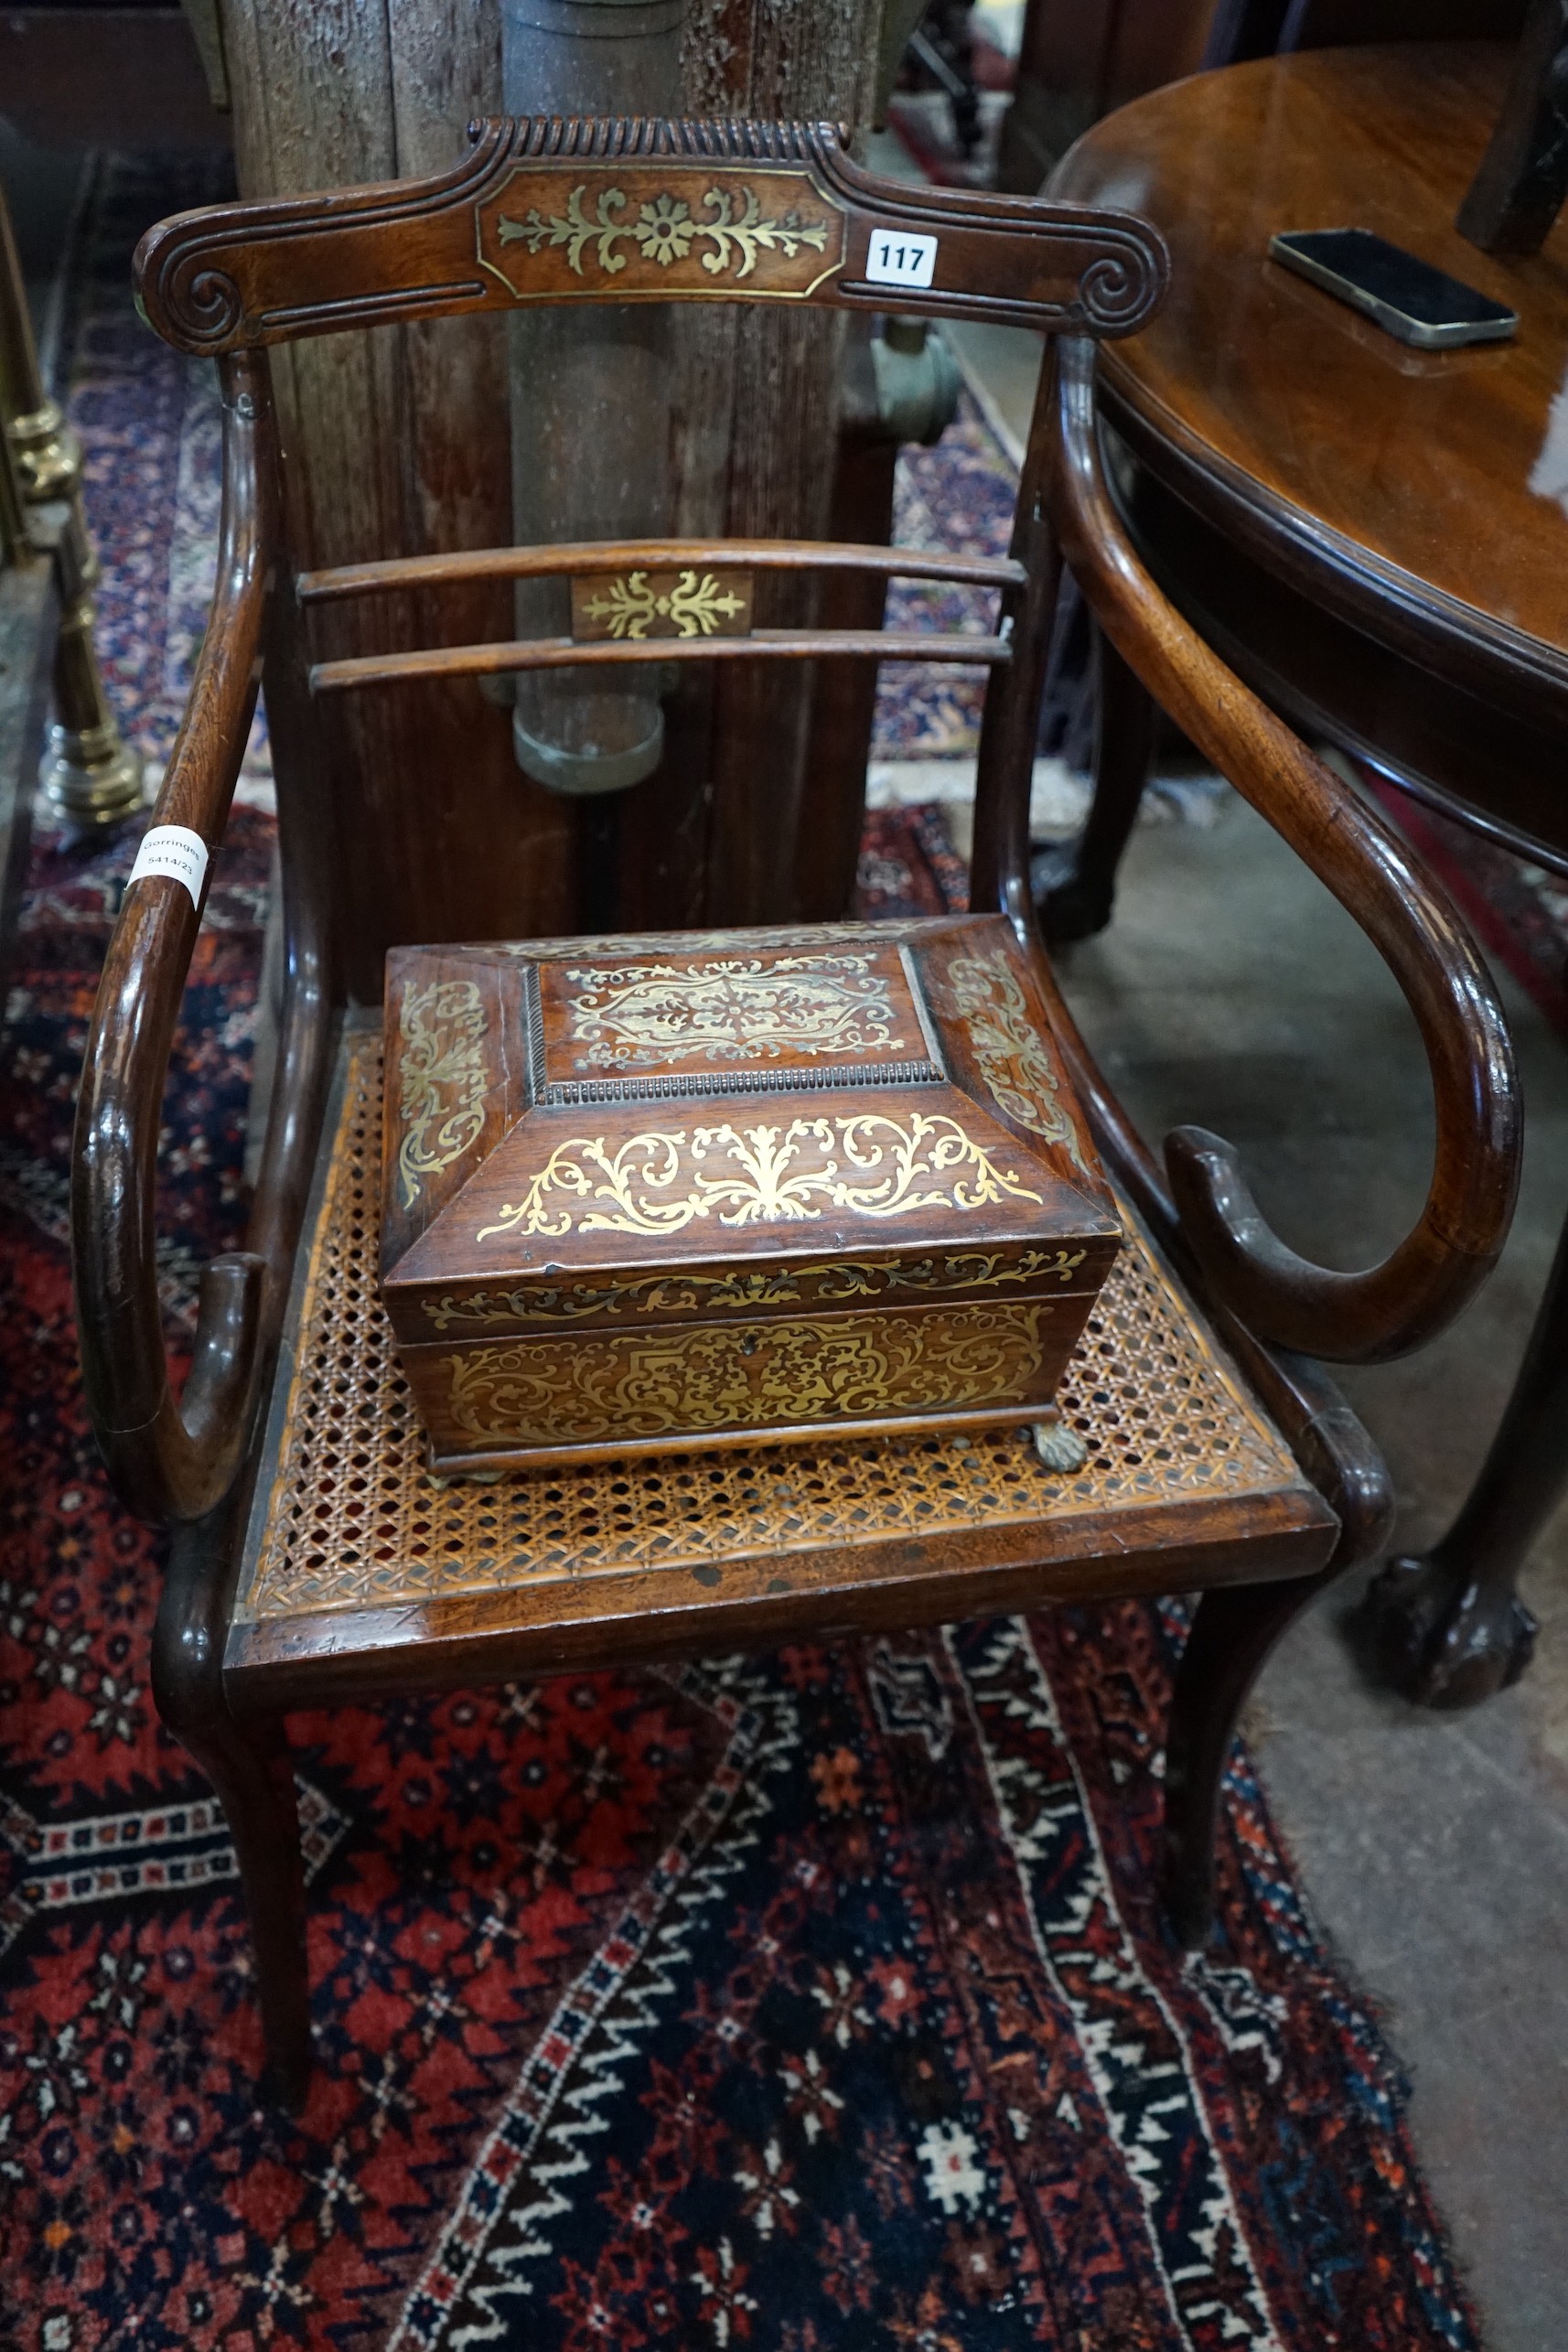 A Regency brass inlaid rosewood cane seat elbow chair together with a Regency brass inlaid work box